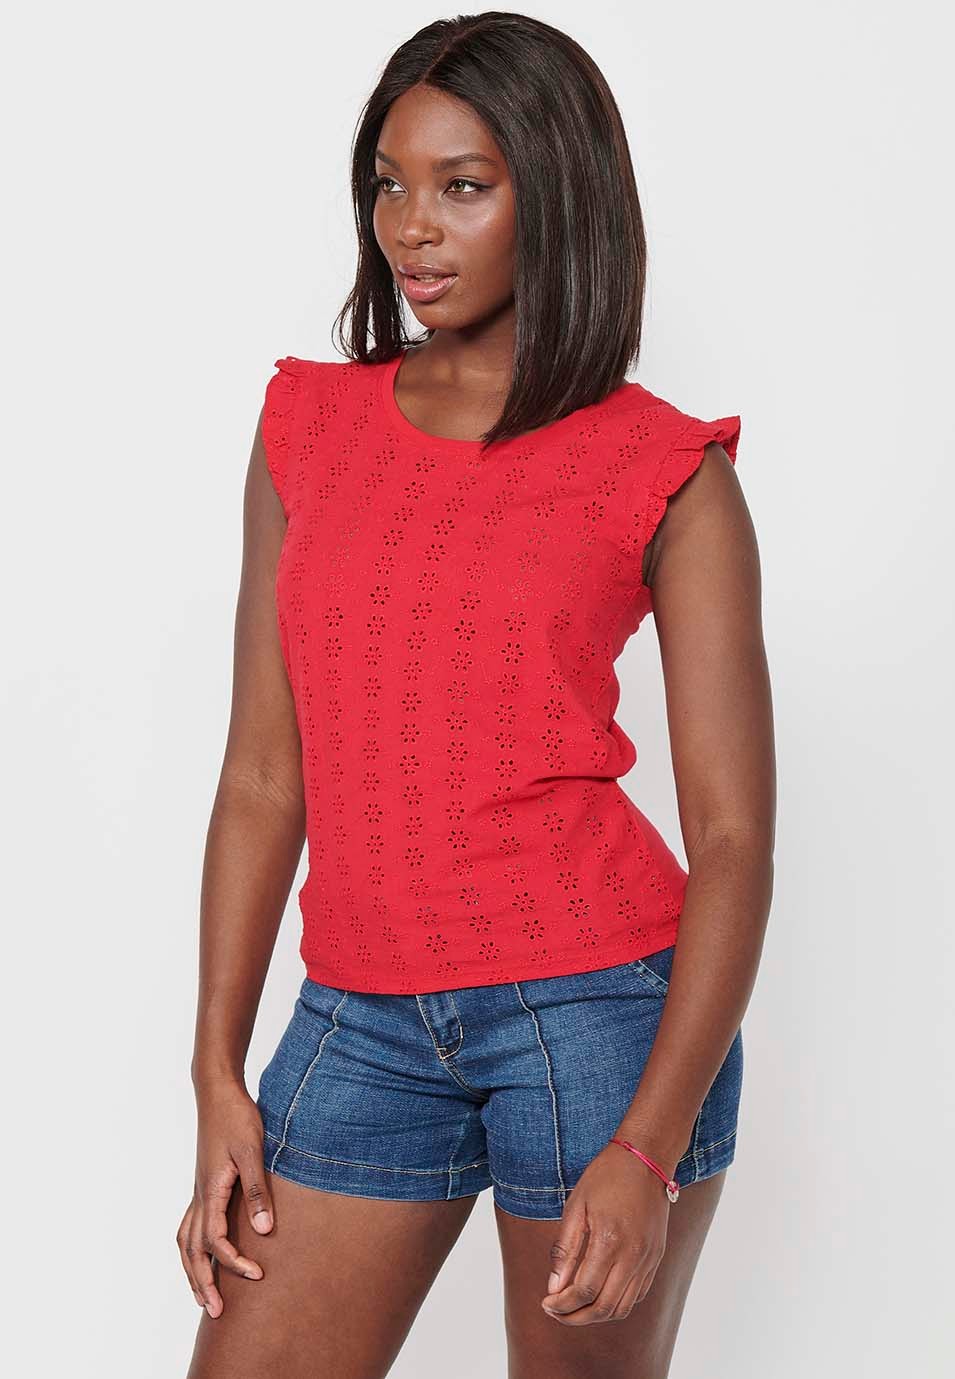 Short sleeve t-shirt, ruffle on the shoulders, red color for women